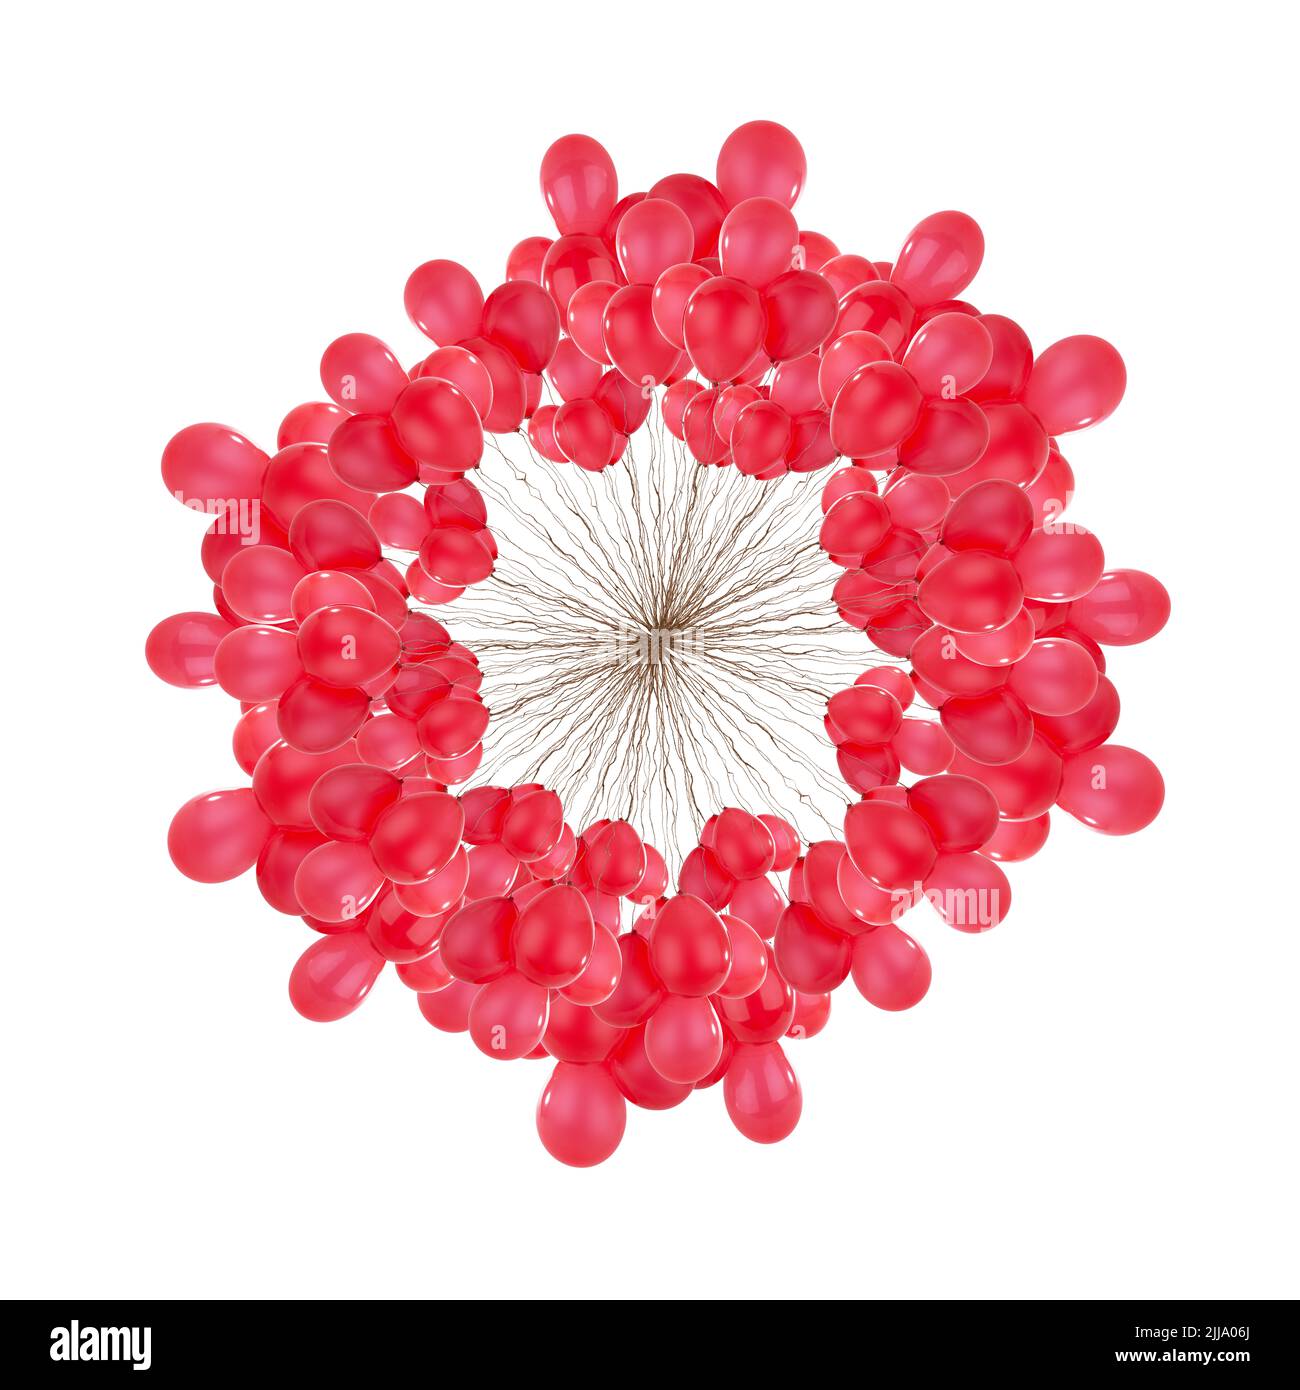 Ring of red balloons with strings isolated on a white background Stock Photo